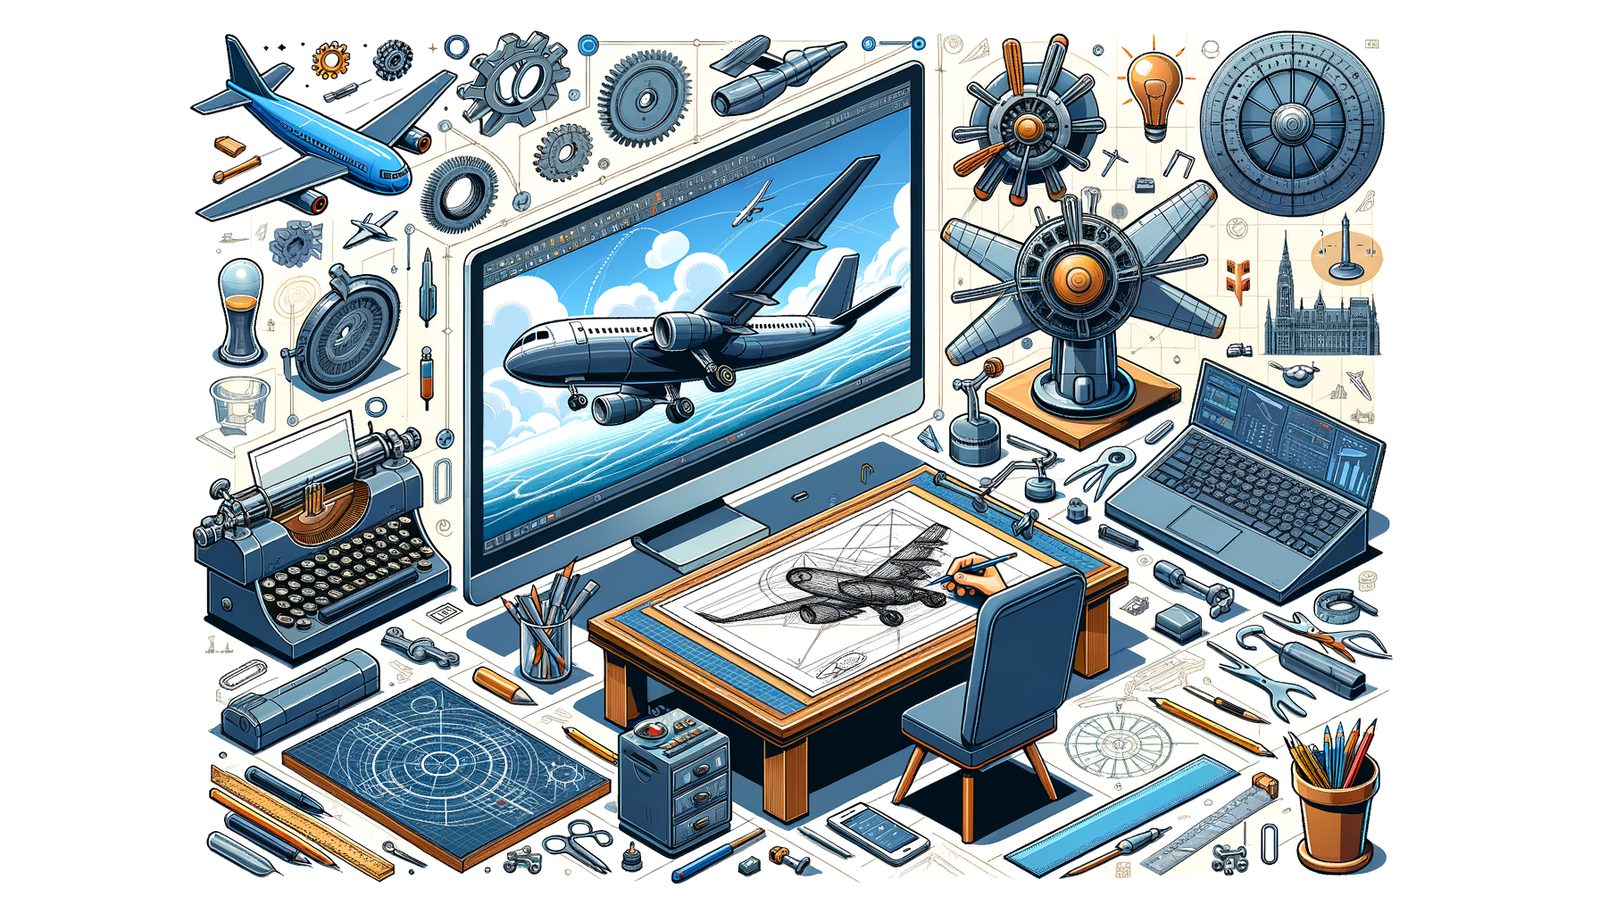 Design Software History: How CATIA Revolutionized Aerospace Engineering: A Historical Perspective